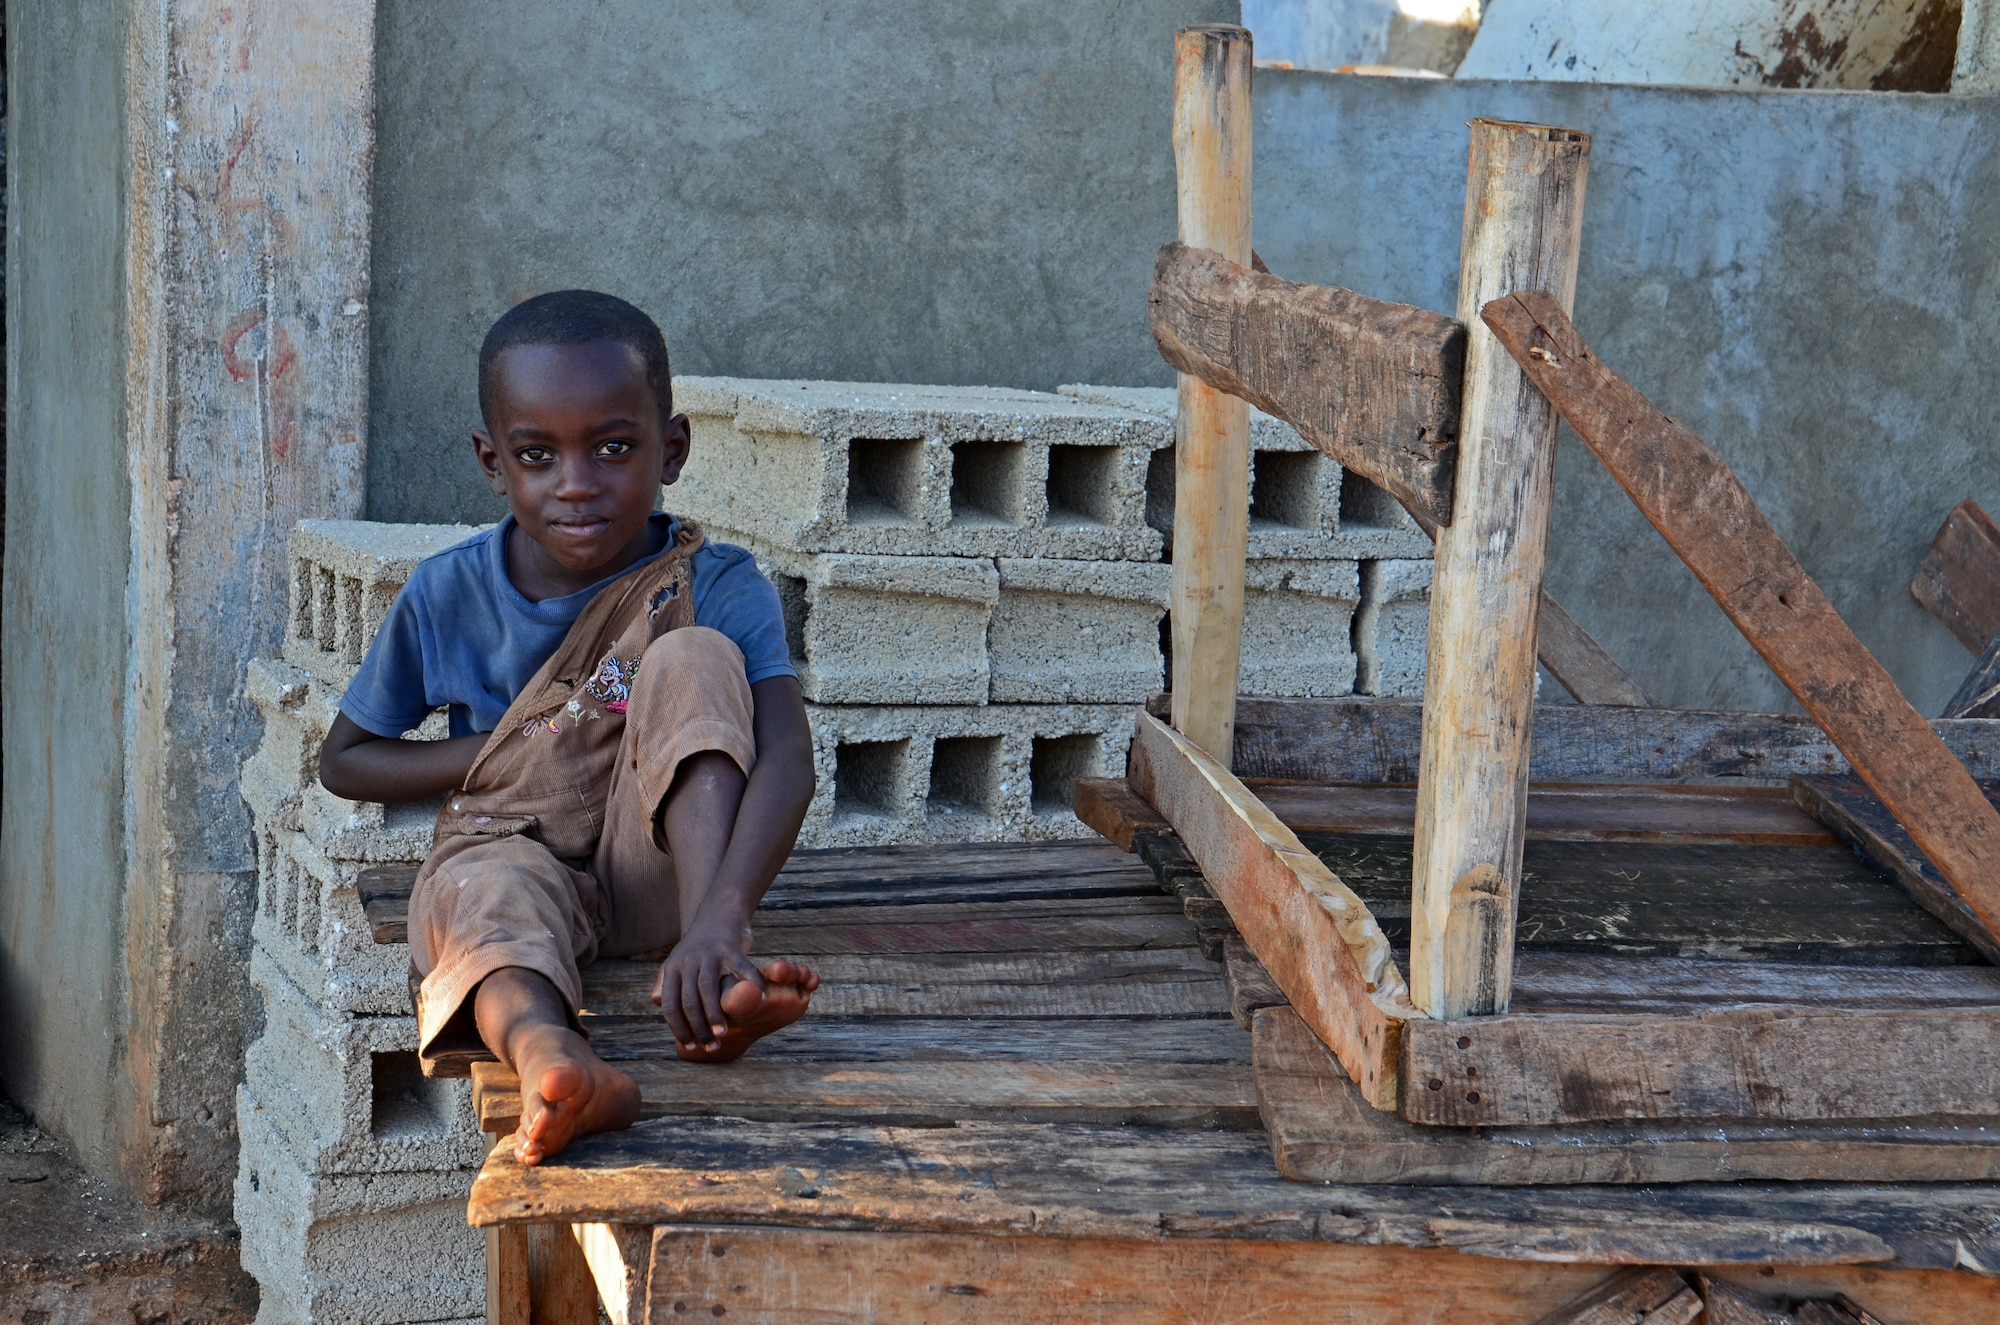 In the marketplace in Pestel, Haiti, a young boy watches the activity. Nearly three years after the lethal earthquake – and the worldwide relief effort, which the 439th Airlift Wing joined – Haiti shows signs of recovery. (U.S. Air Force photo by Lt. Col. James Bishop)